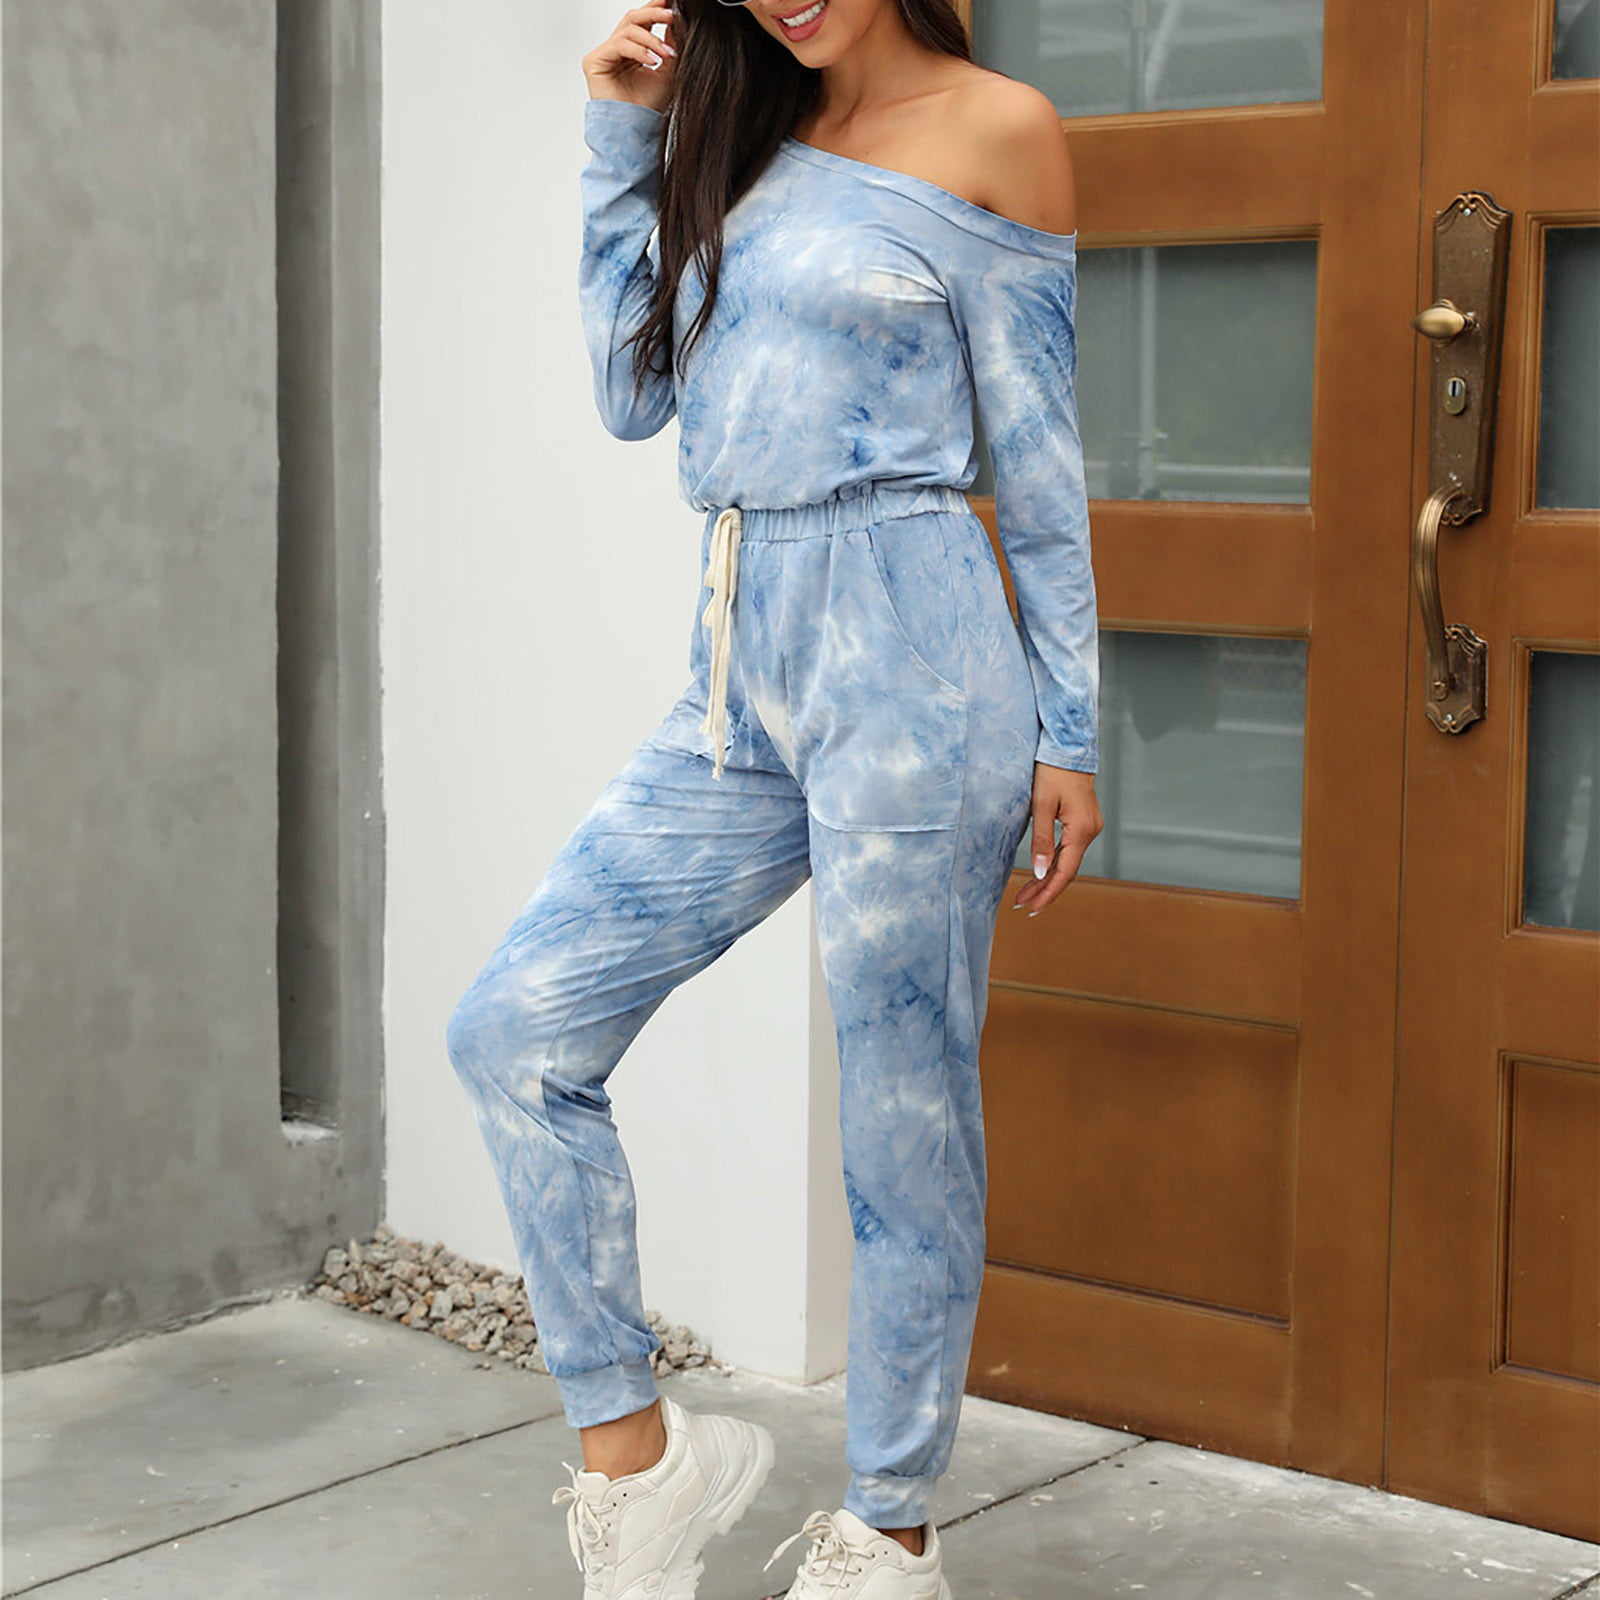 Jumpsuits: The cool trend that keeps coming back | Stuff.co.nz